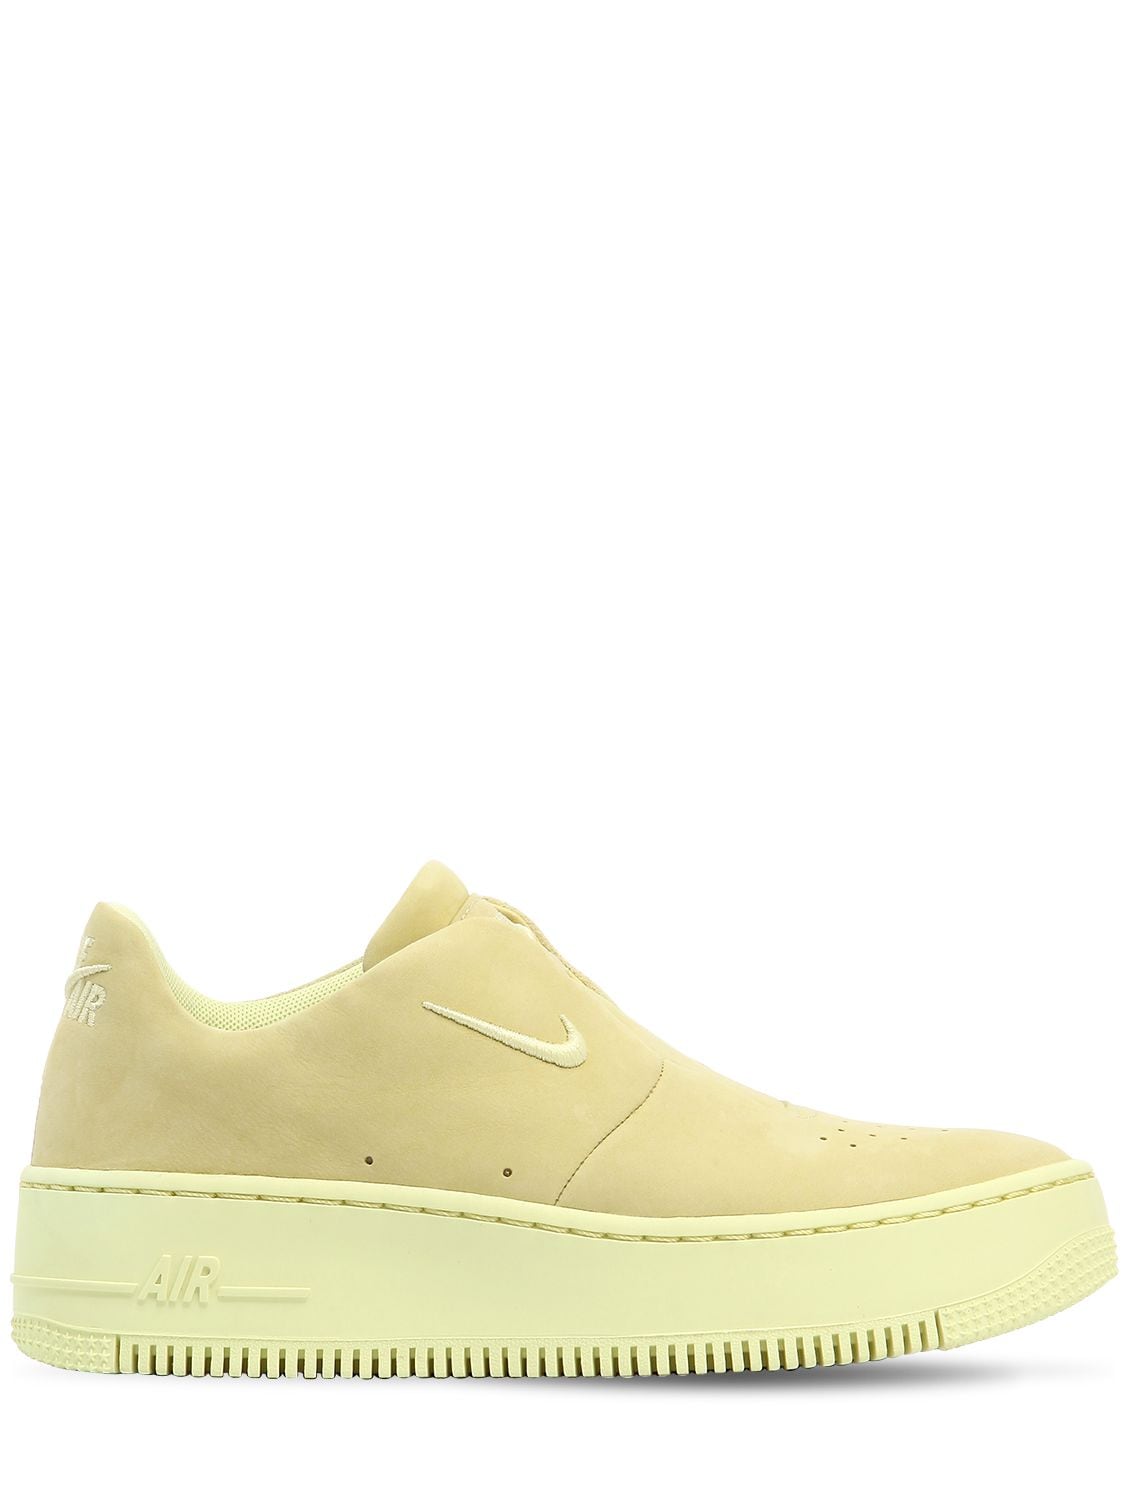 Nike Air Force 1 Sage Xx Slip-on Sneakers In Yellow